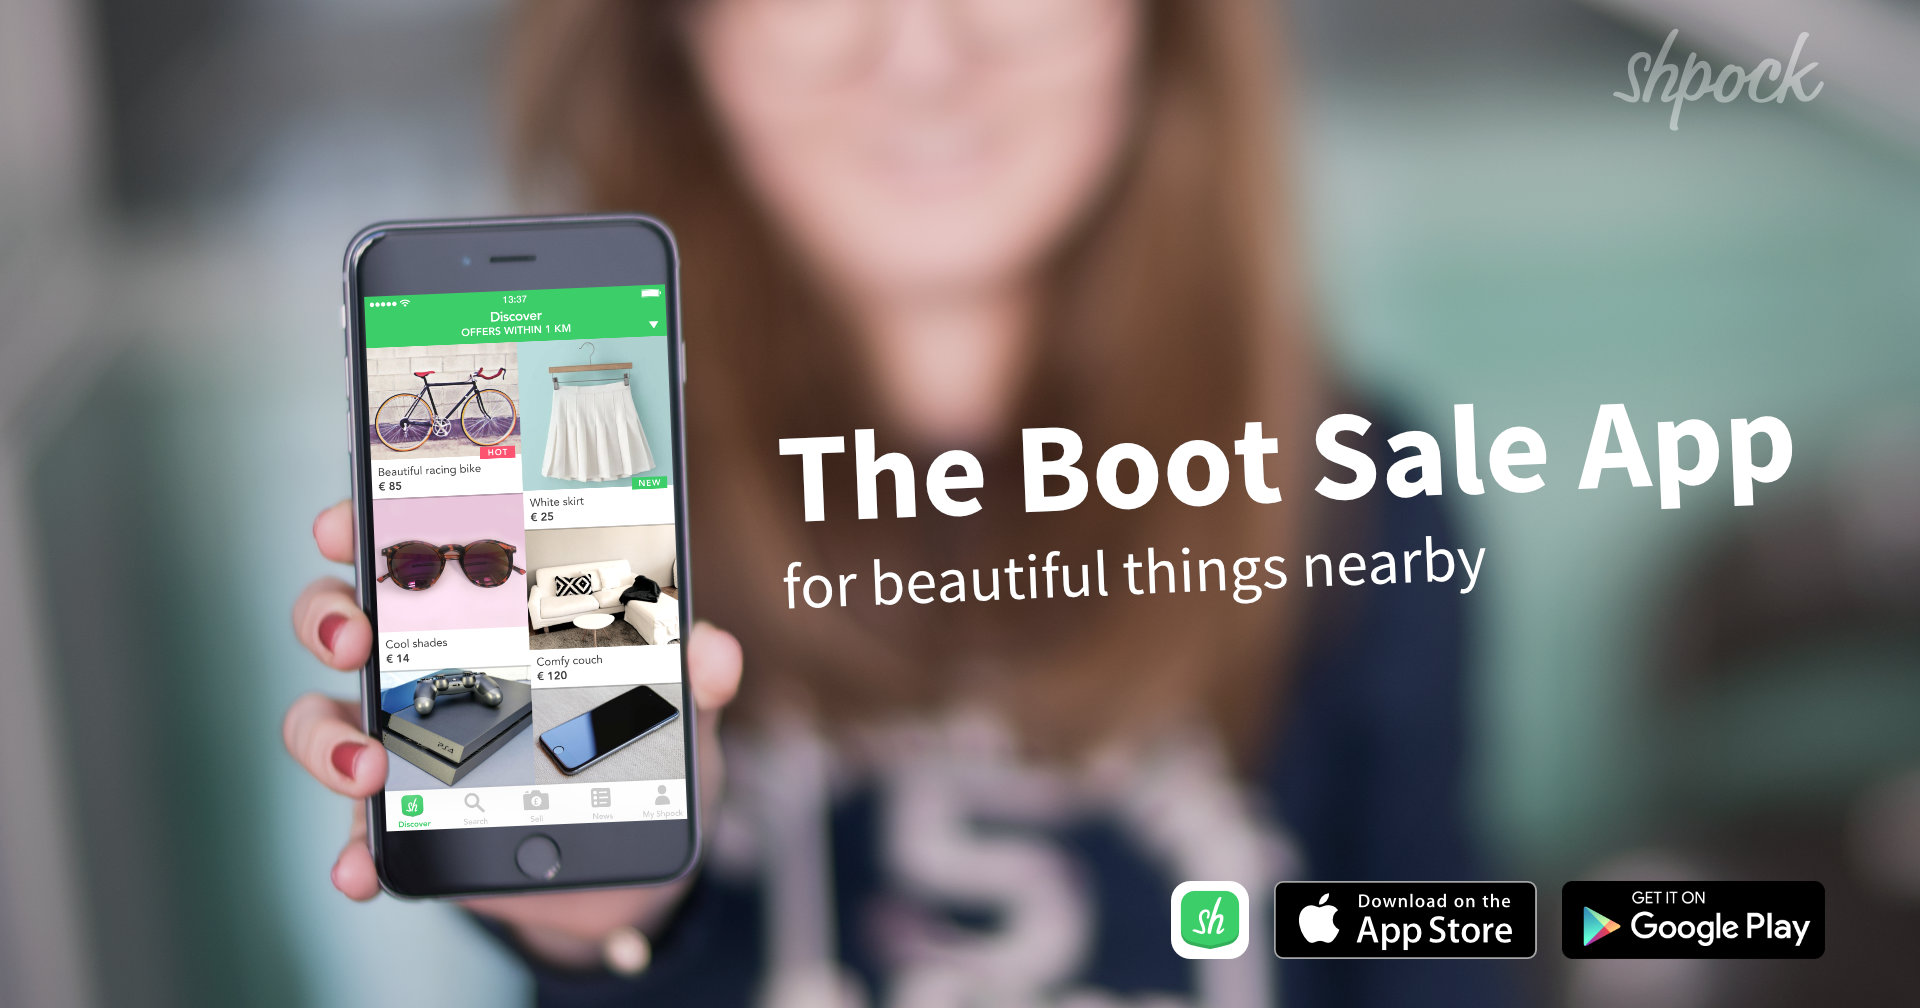 How to Sell Unwanted Items with the Shpock App